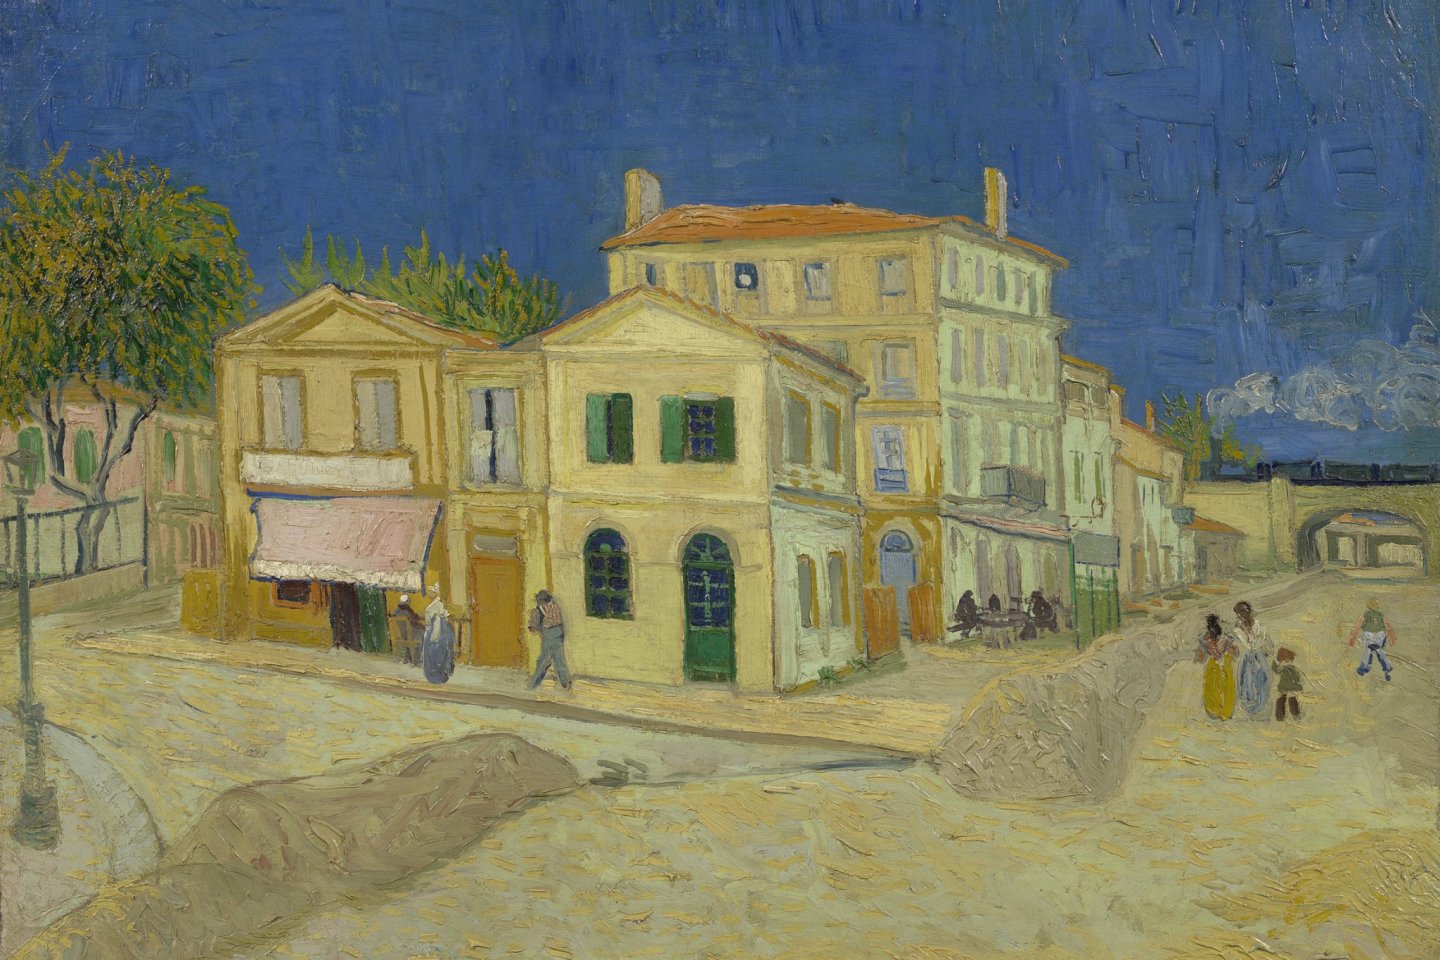 Van Gogh\'s The Yellow House (1888) is one of the pieces that will be displayed at the event